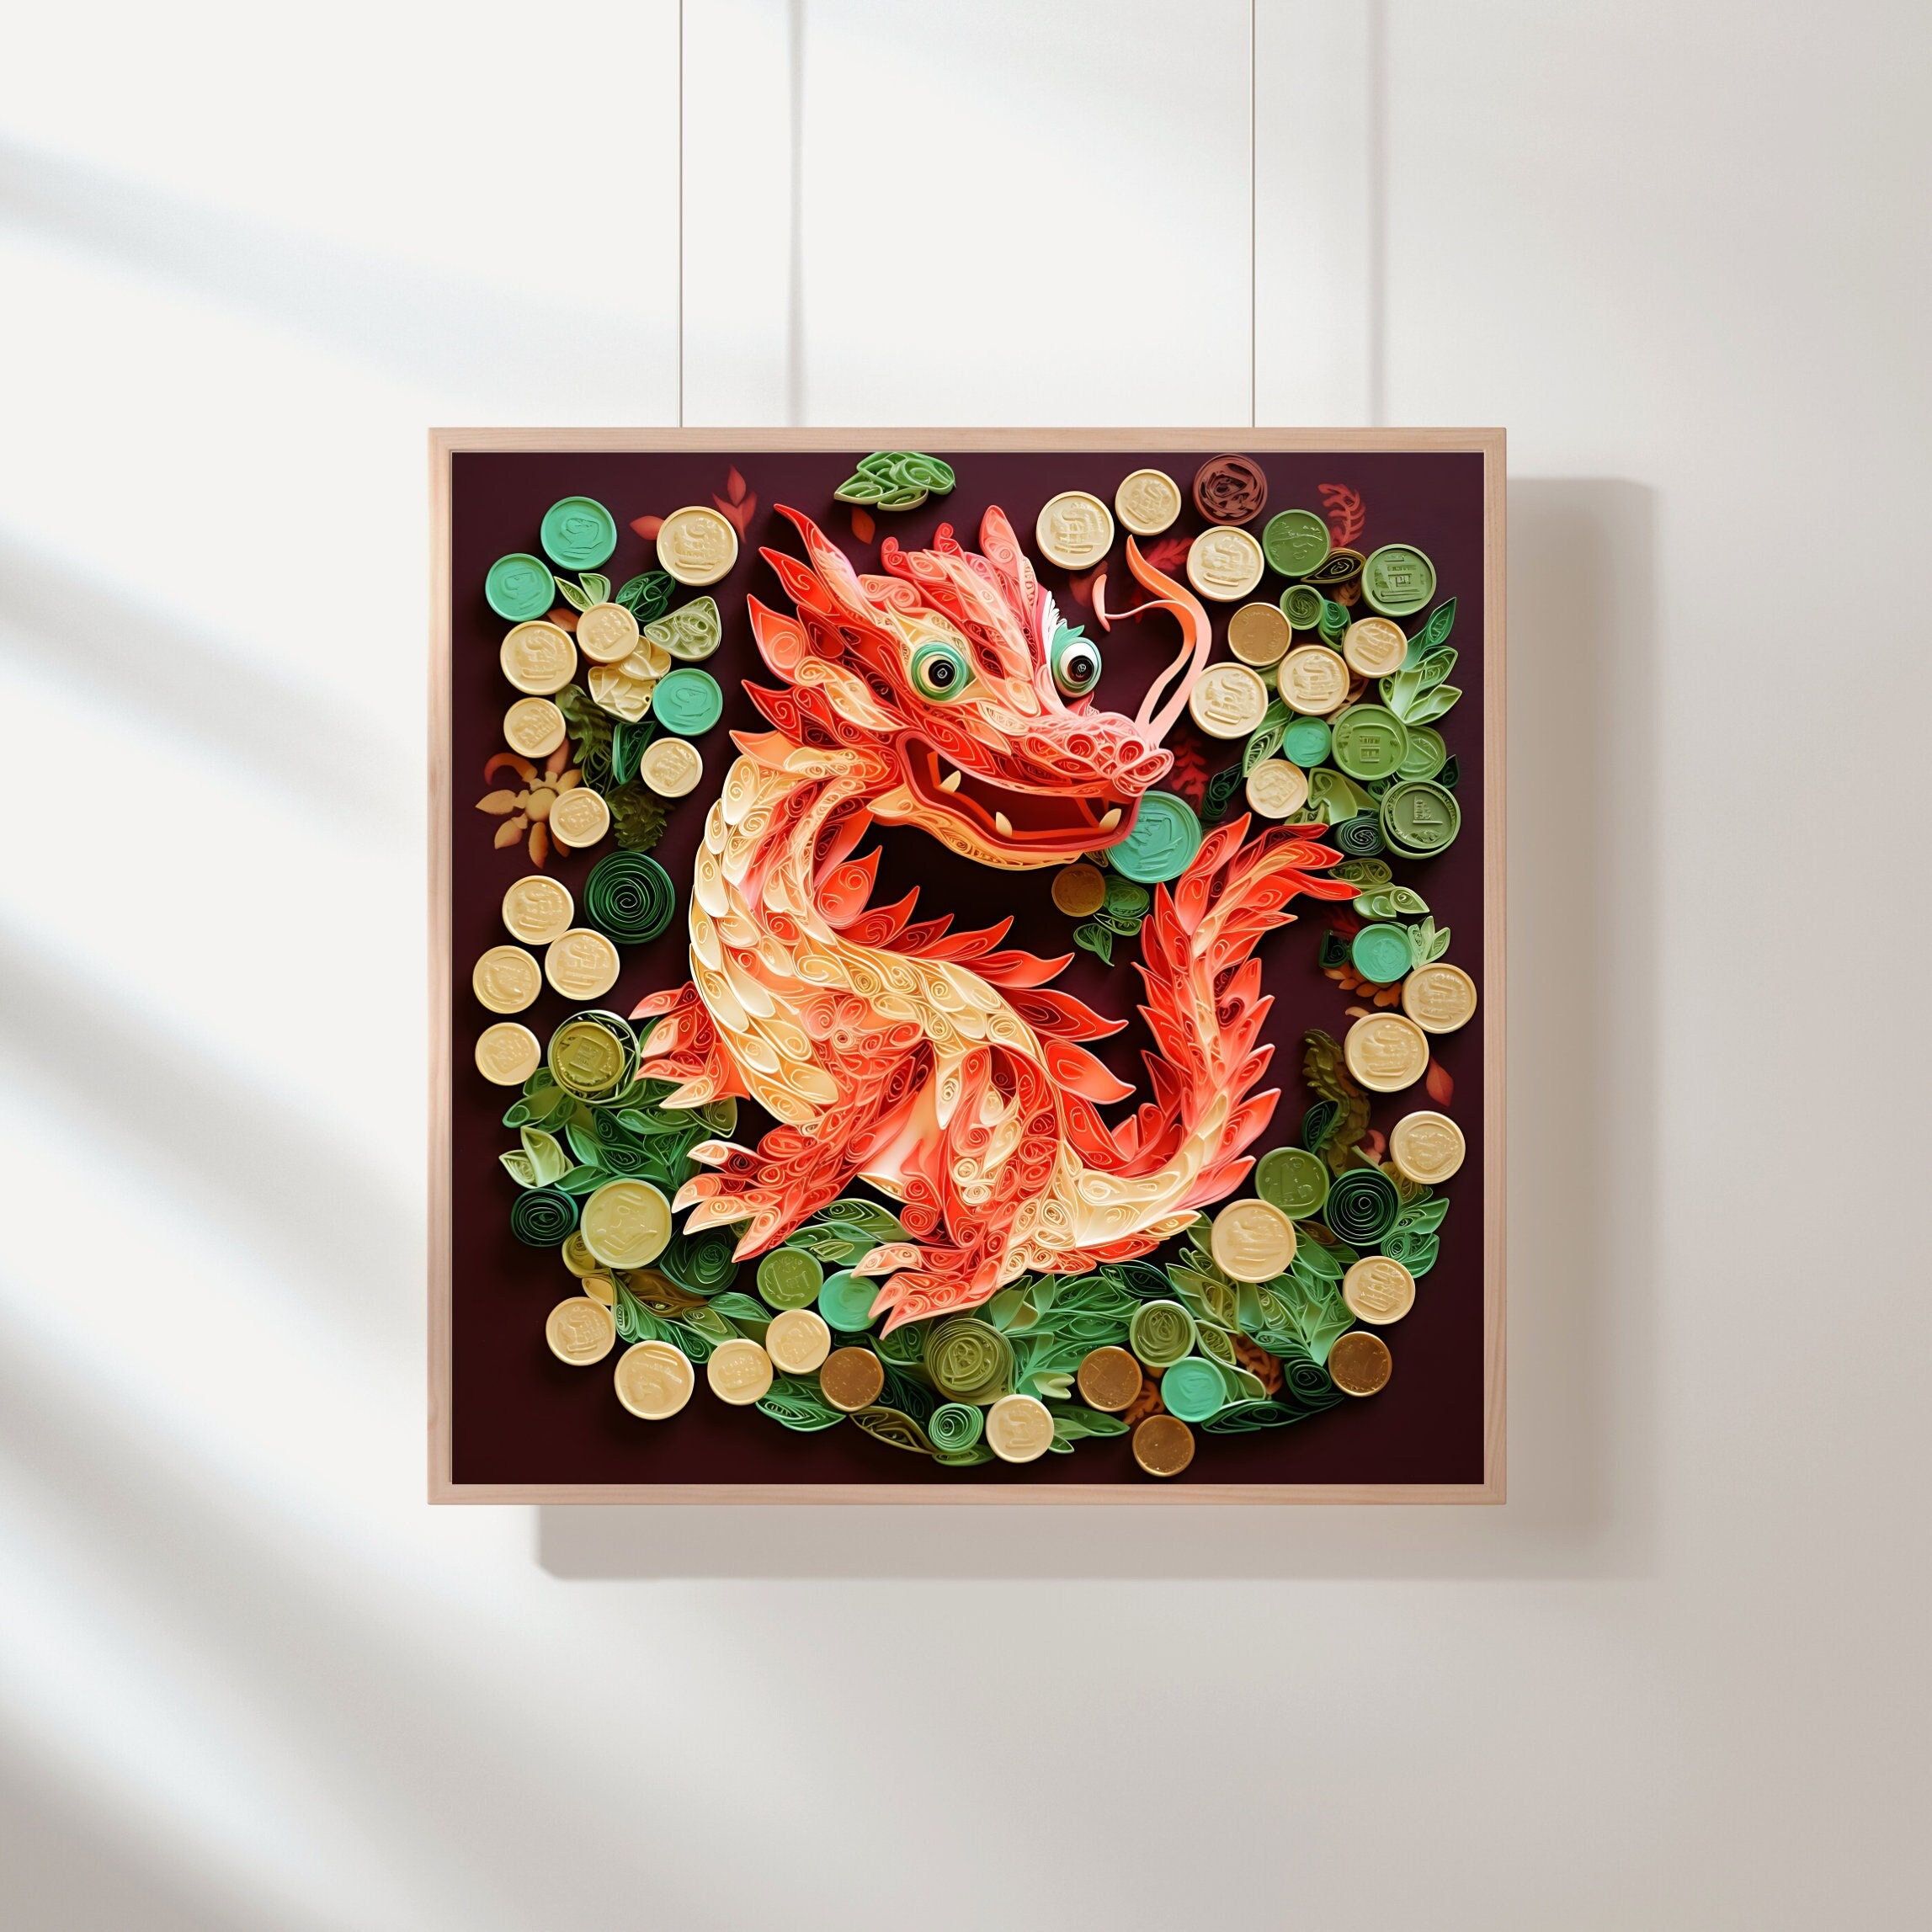 Quilling paper art of a symmetrical dragon with multiple horns on